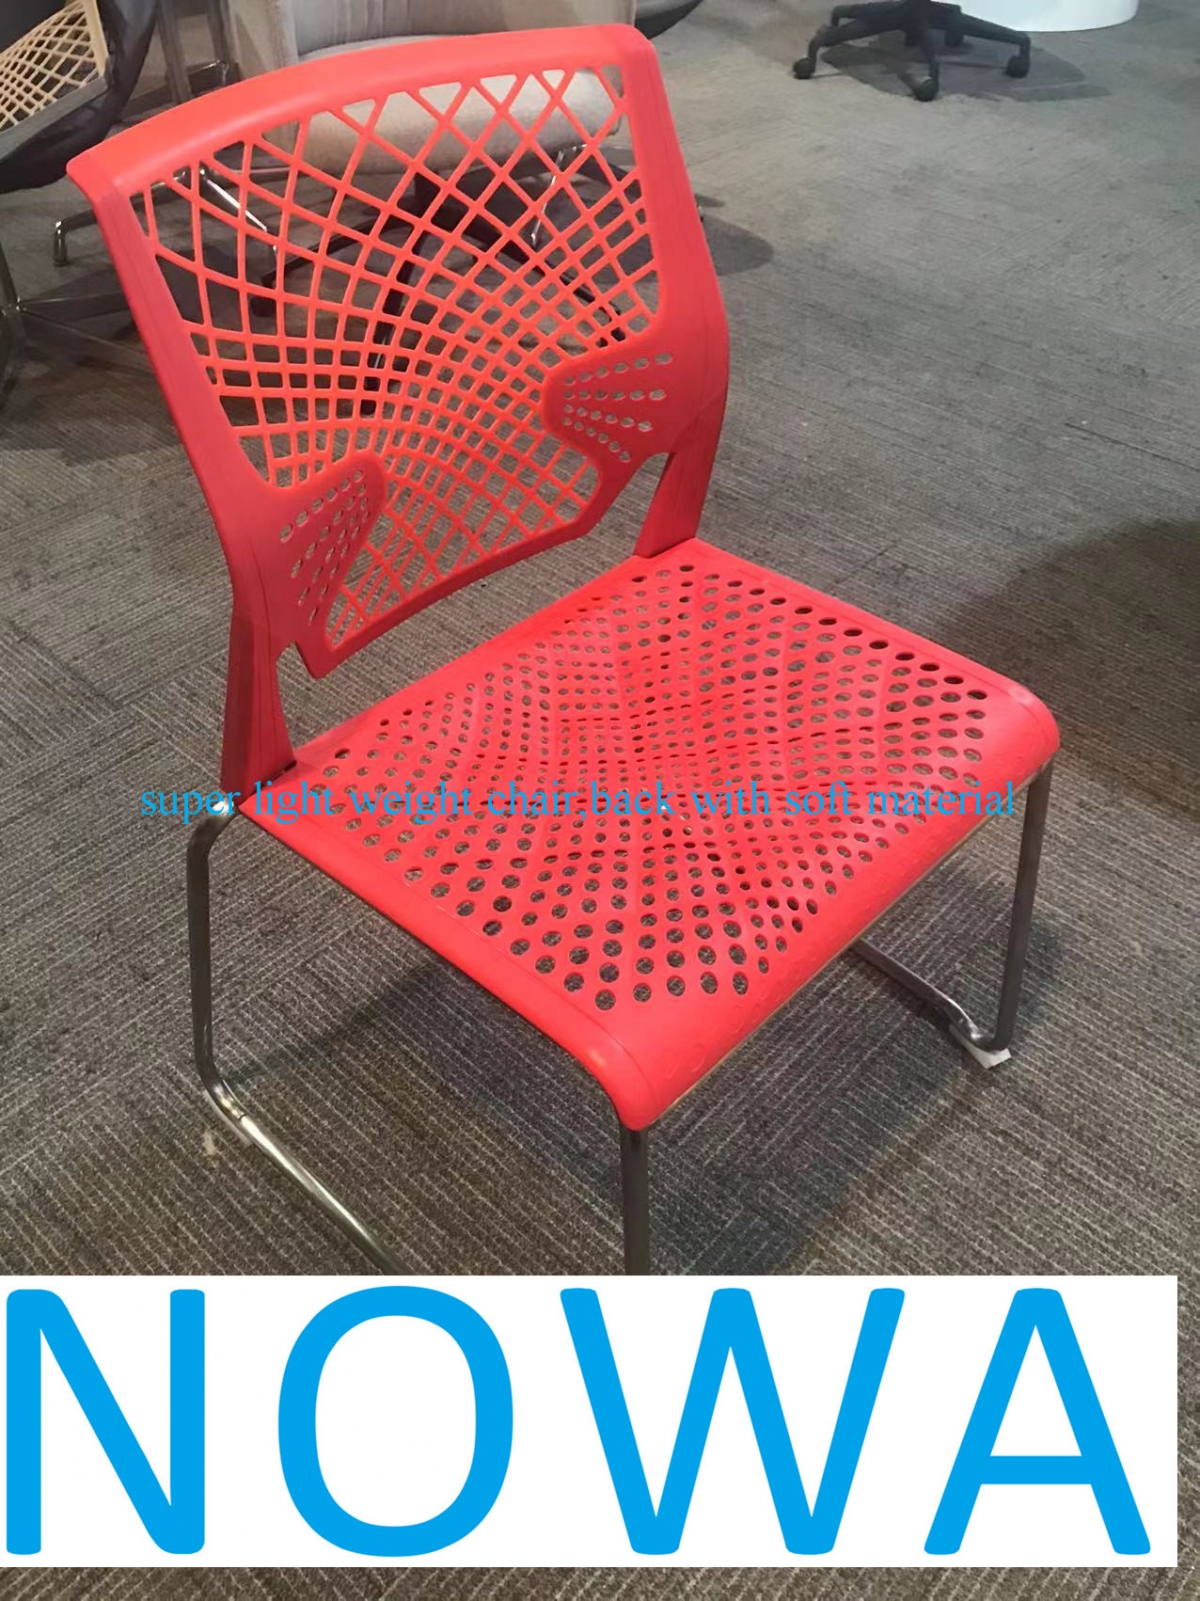 2022 colorful design public chair assembly video-NOWA-China Office Furniture, China Custom Made Furniture,